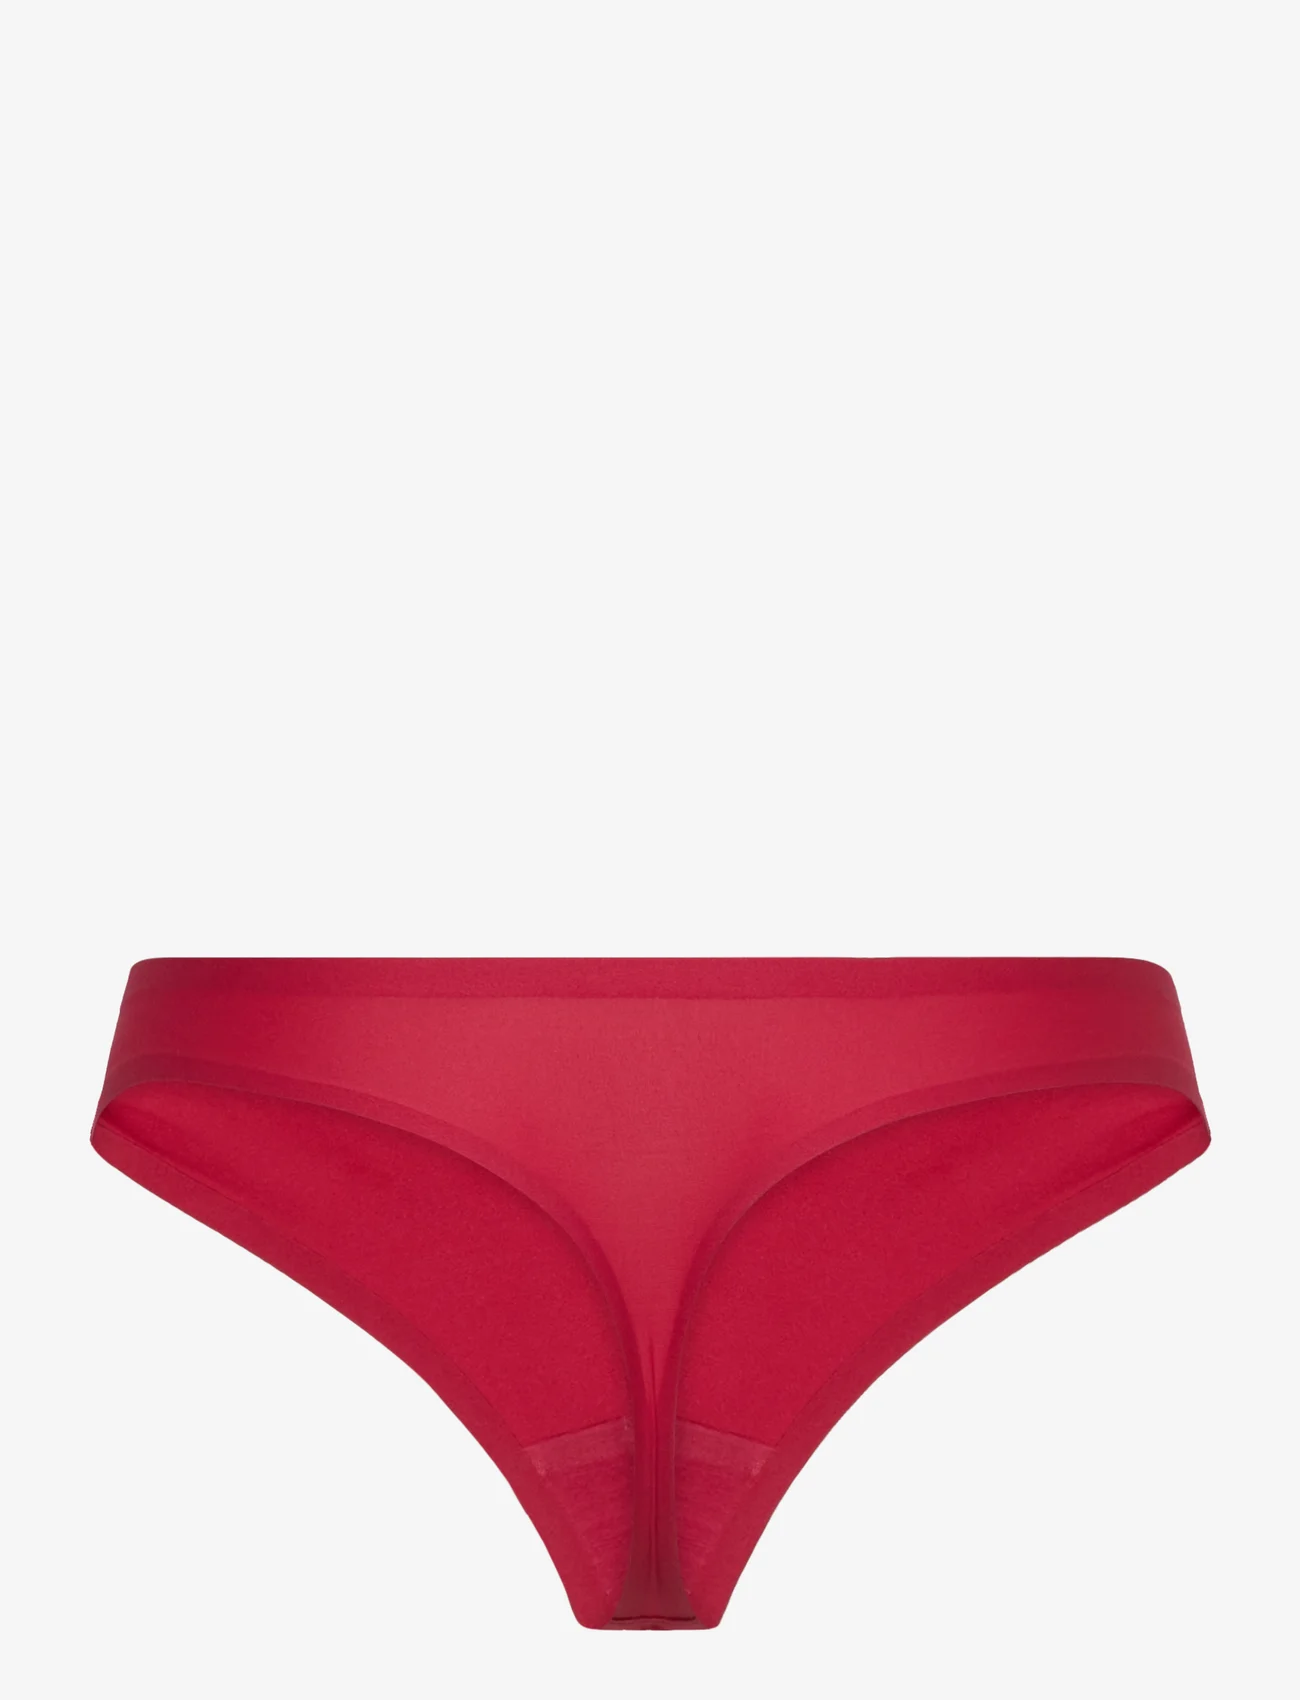 CHANTELLE - Softstretch Thong - seamless panties - passion red - 1